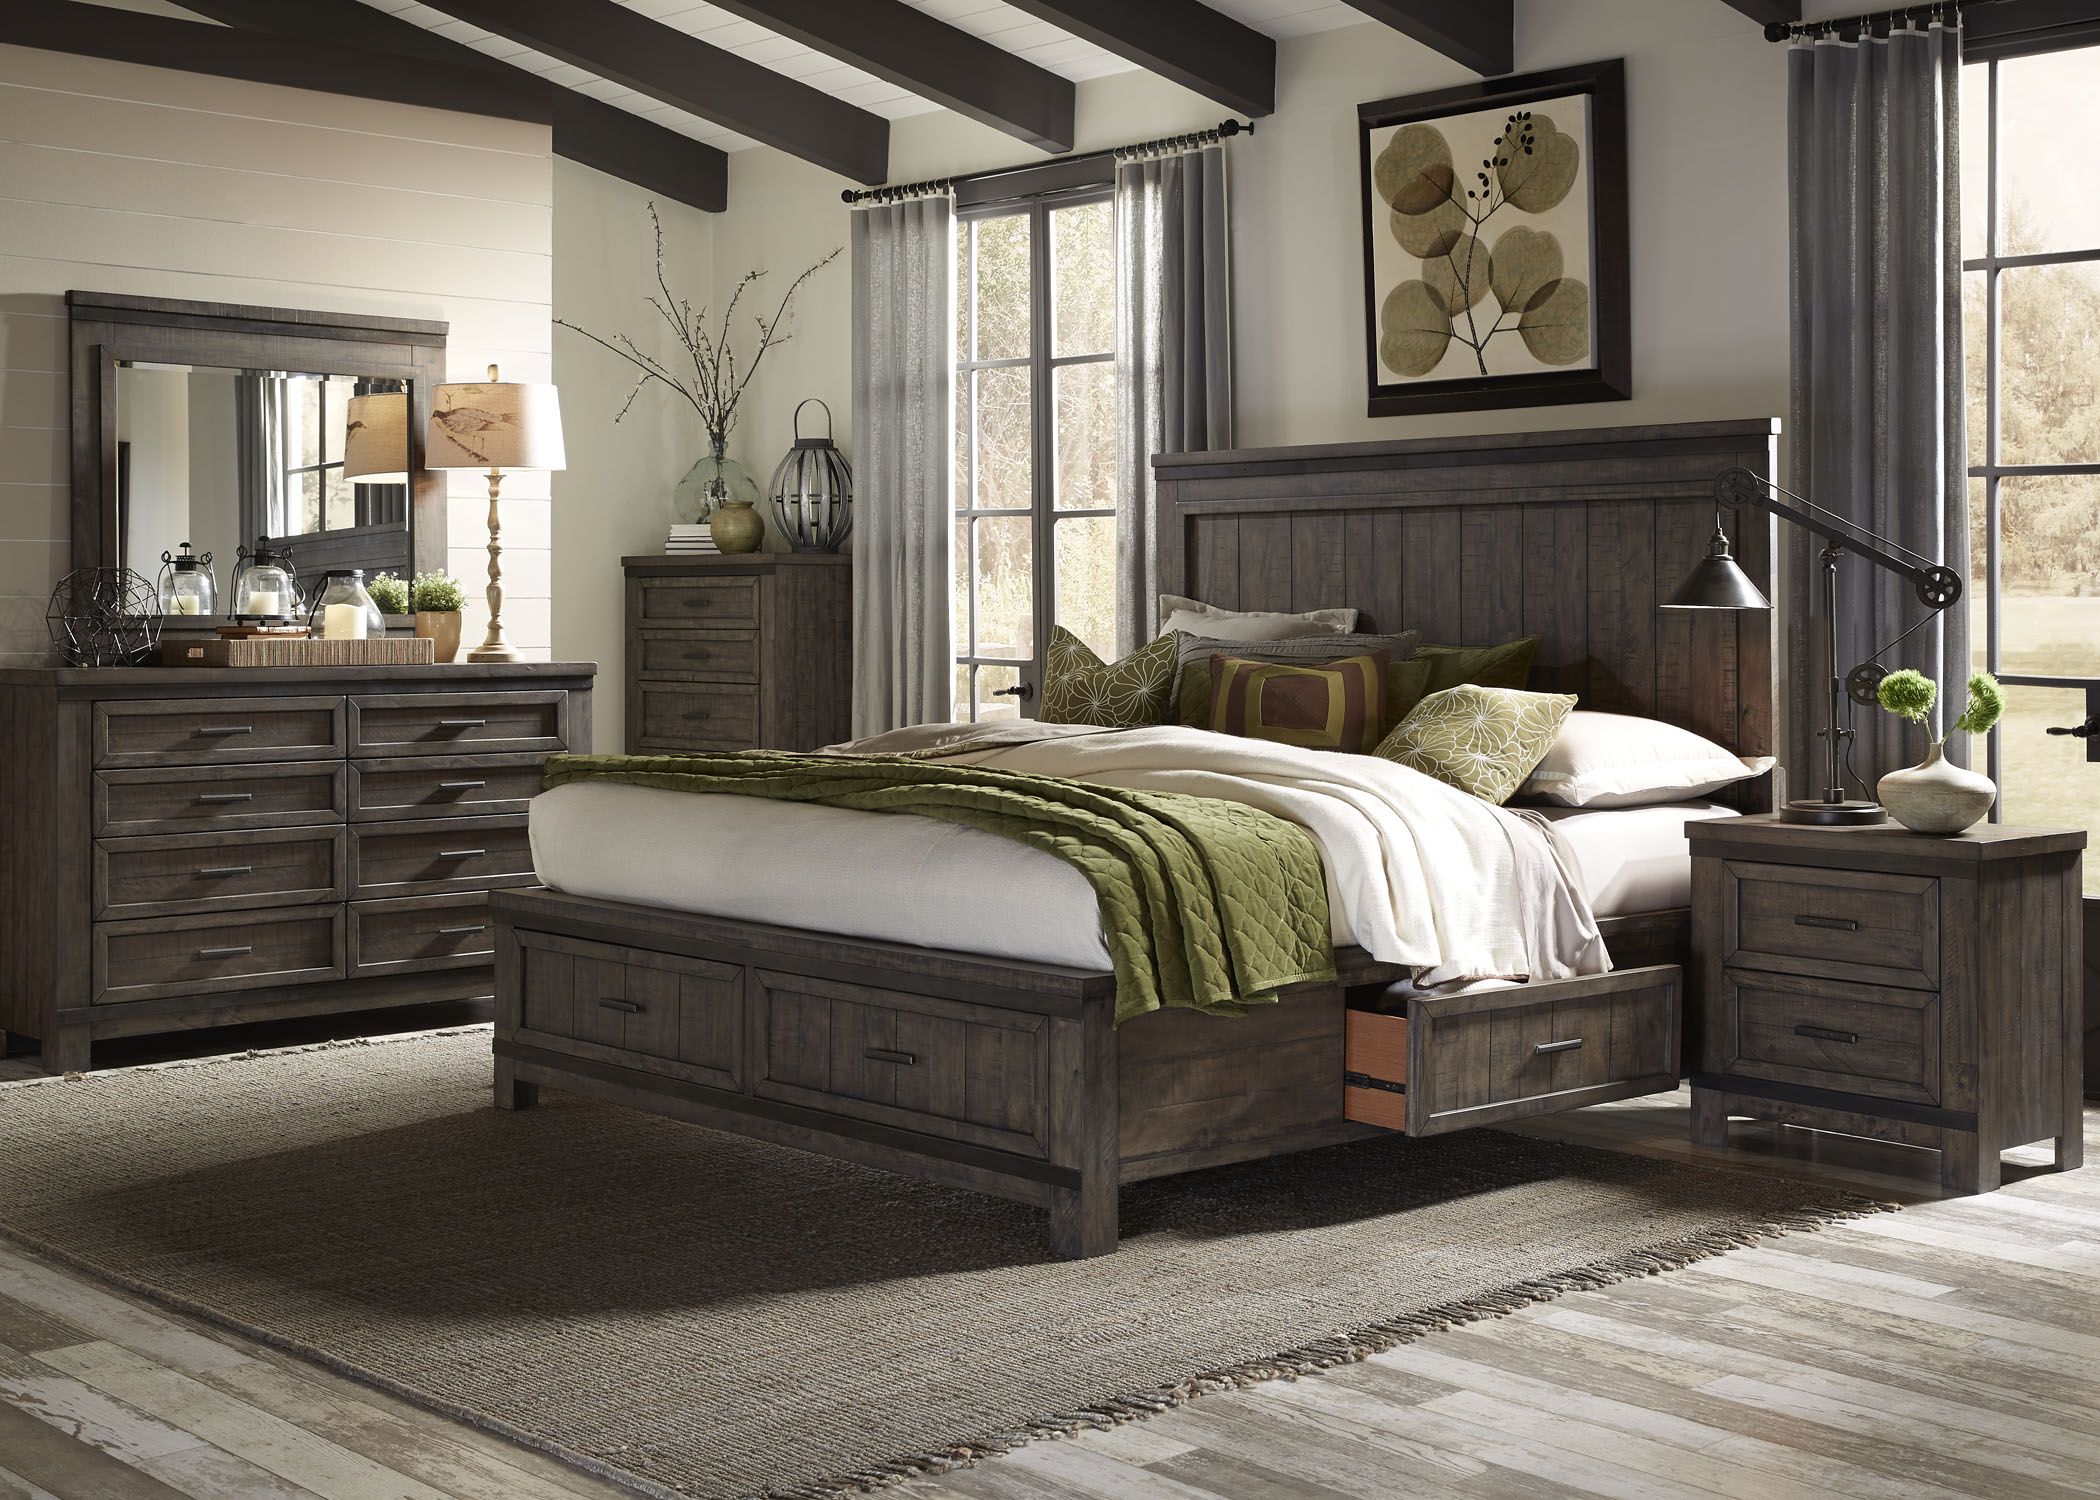 Liberty Furniture Thornwood Hills Bedroom King Two Sided Storage Bed, Dresser, Mirror, and Night Stand Collection